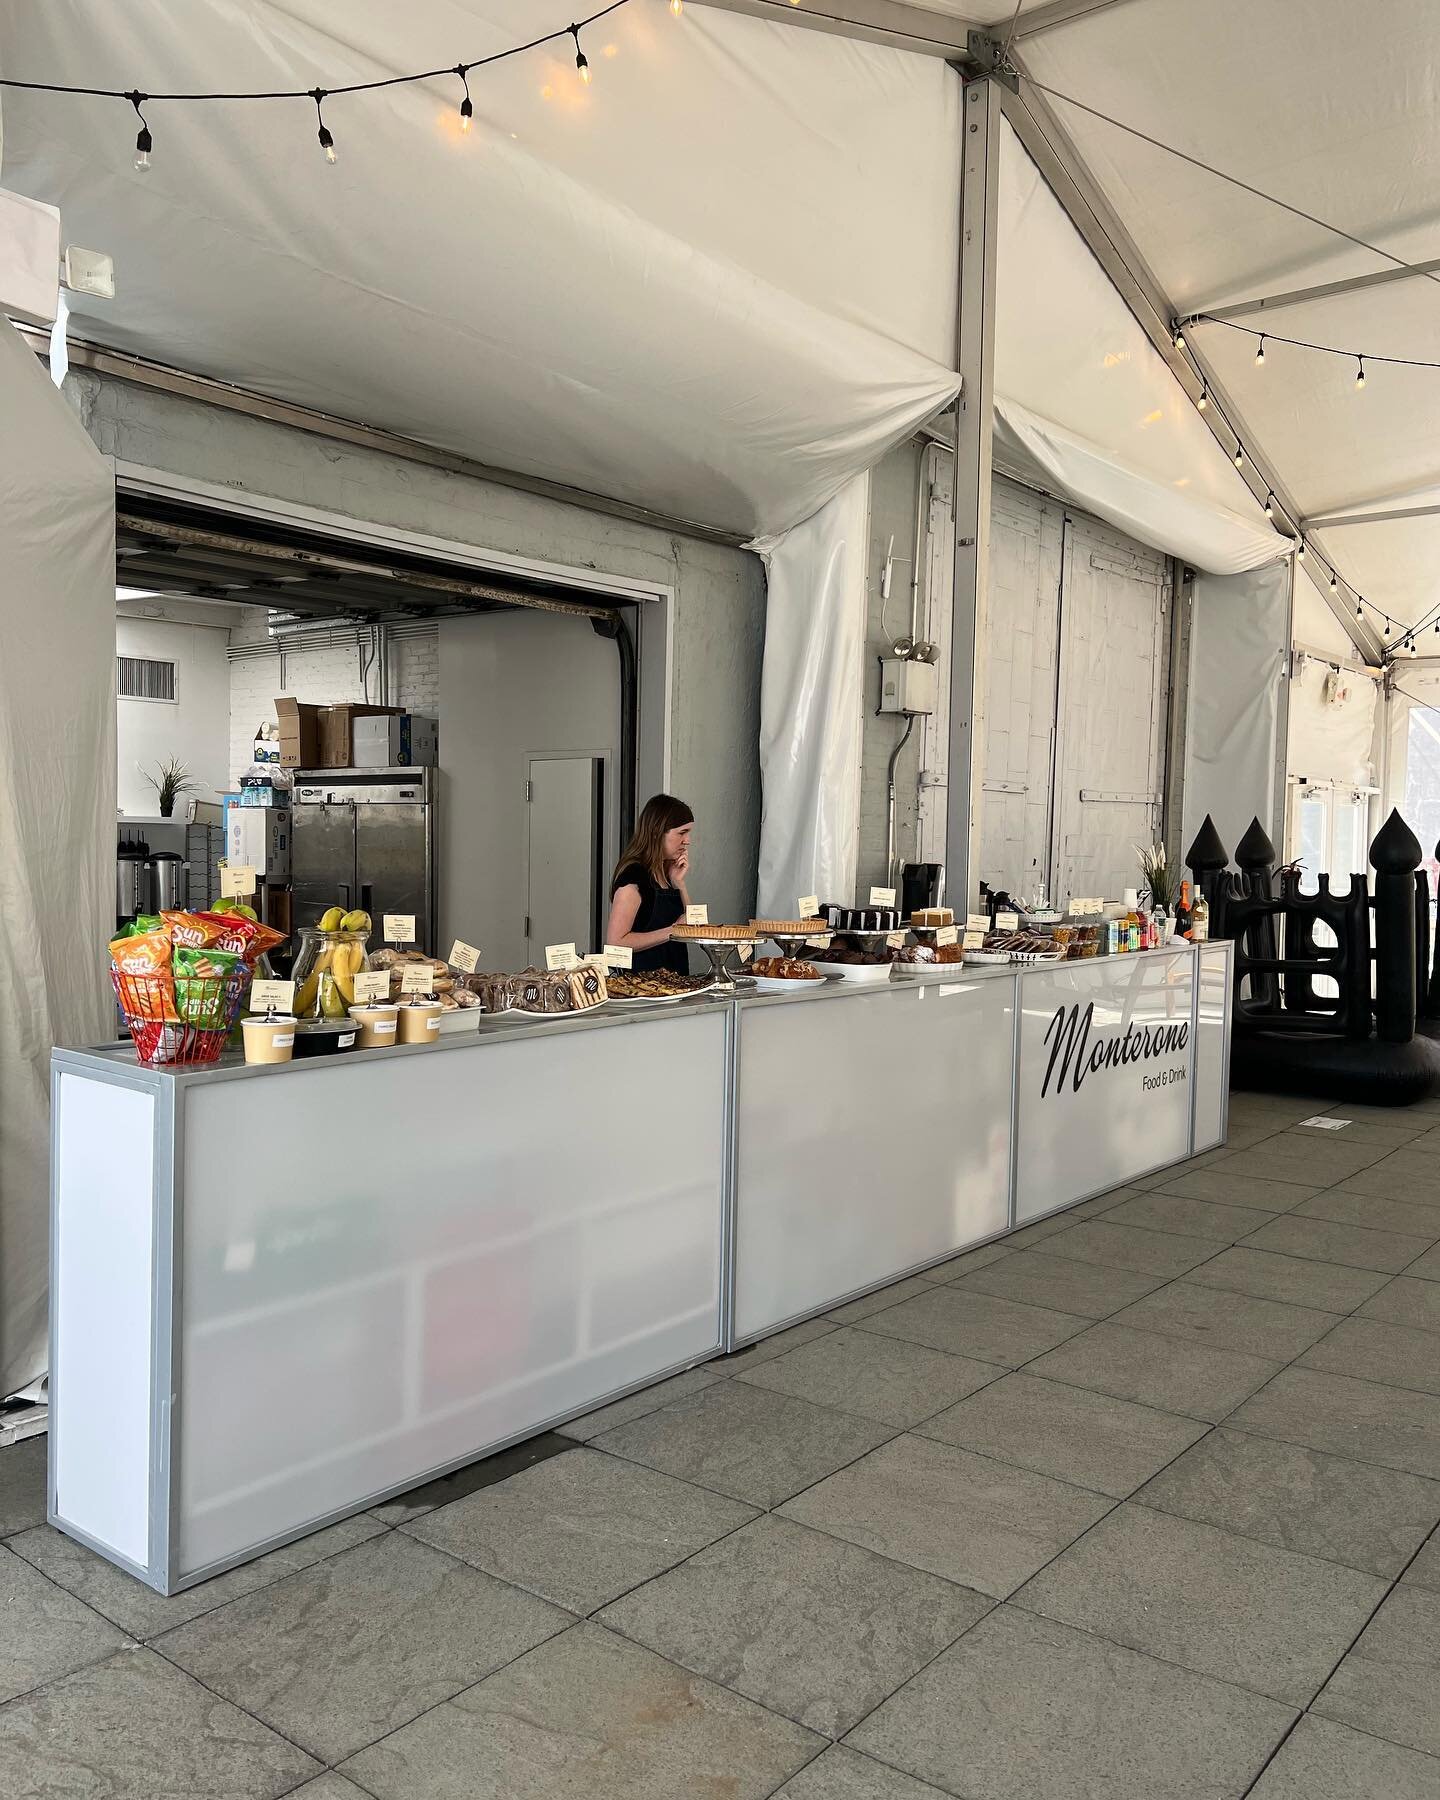 To another successful year with NADA, we enjoyed being on the beautiful rooftop, and hosting a amazing dinner. #monterone #catering #monteronecatering #nada #nadaartfair